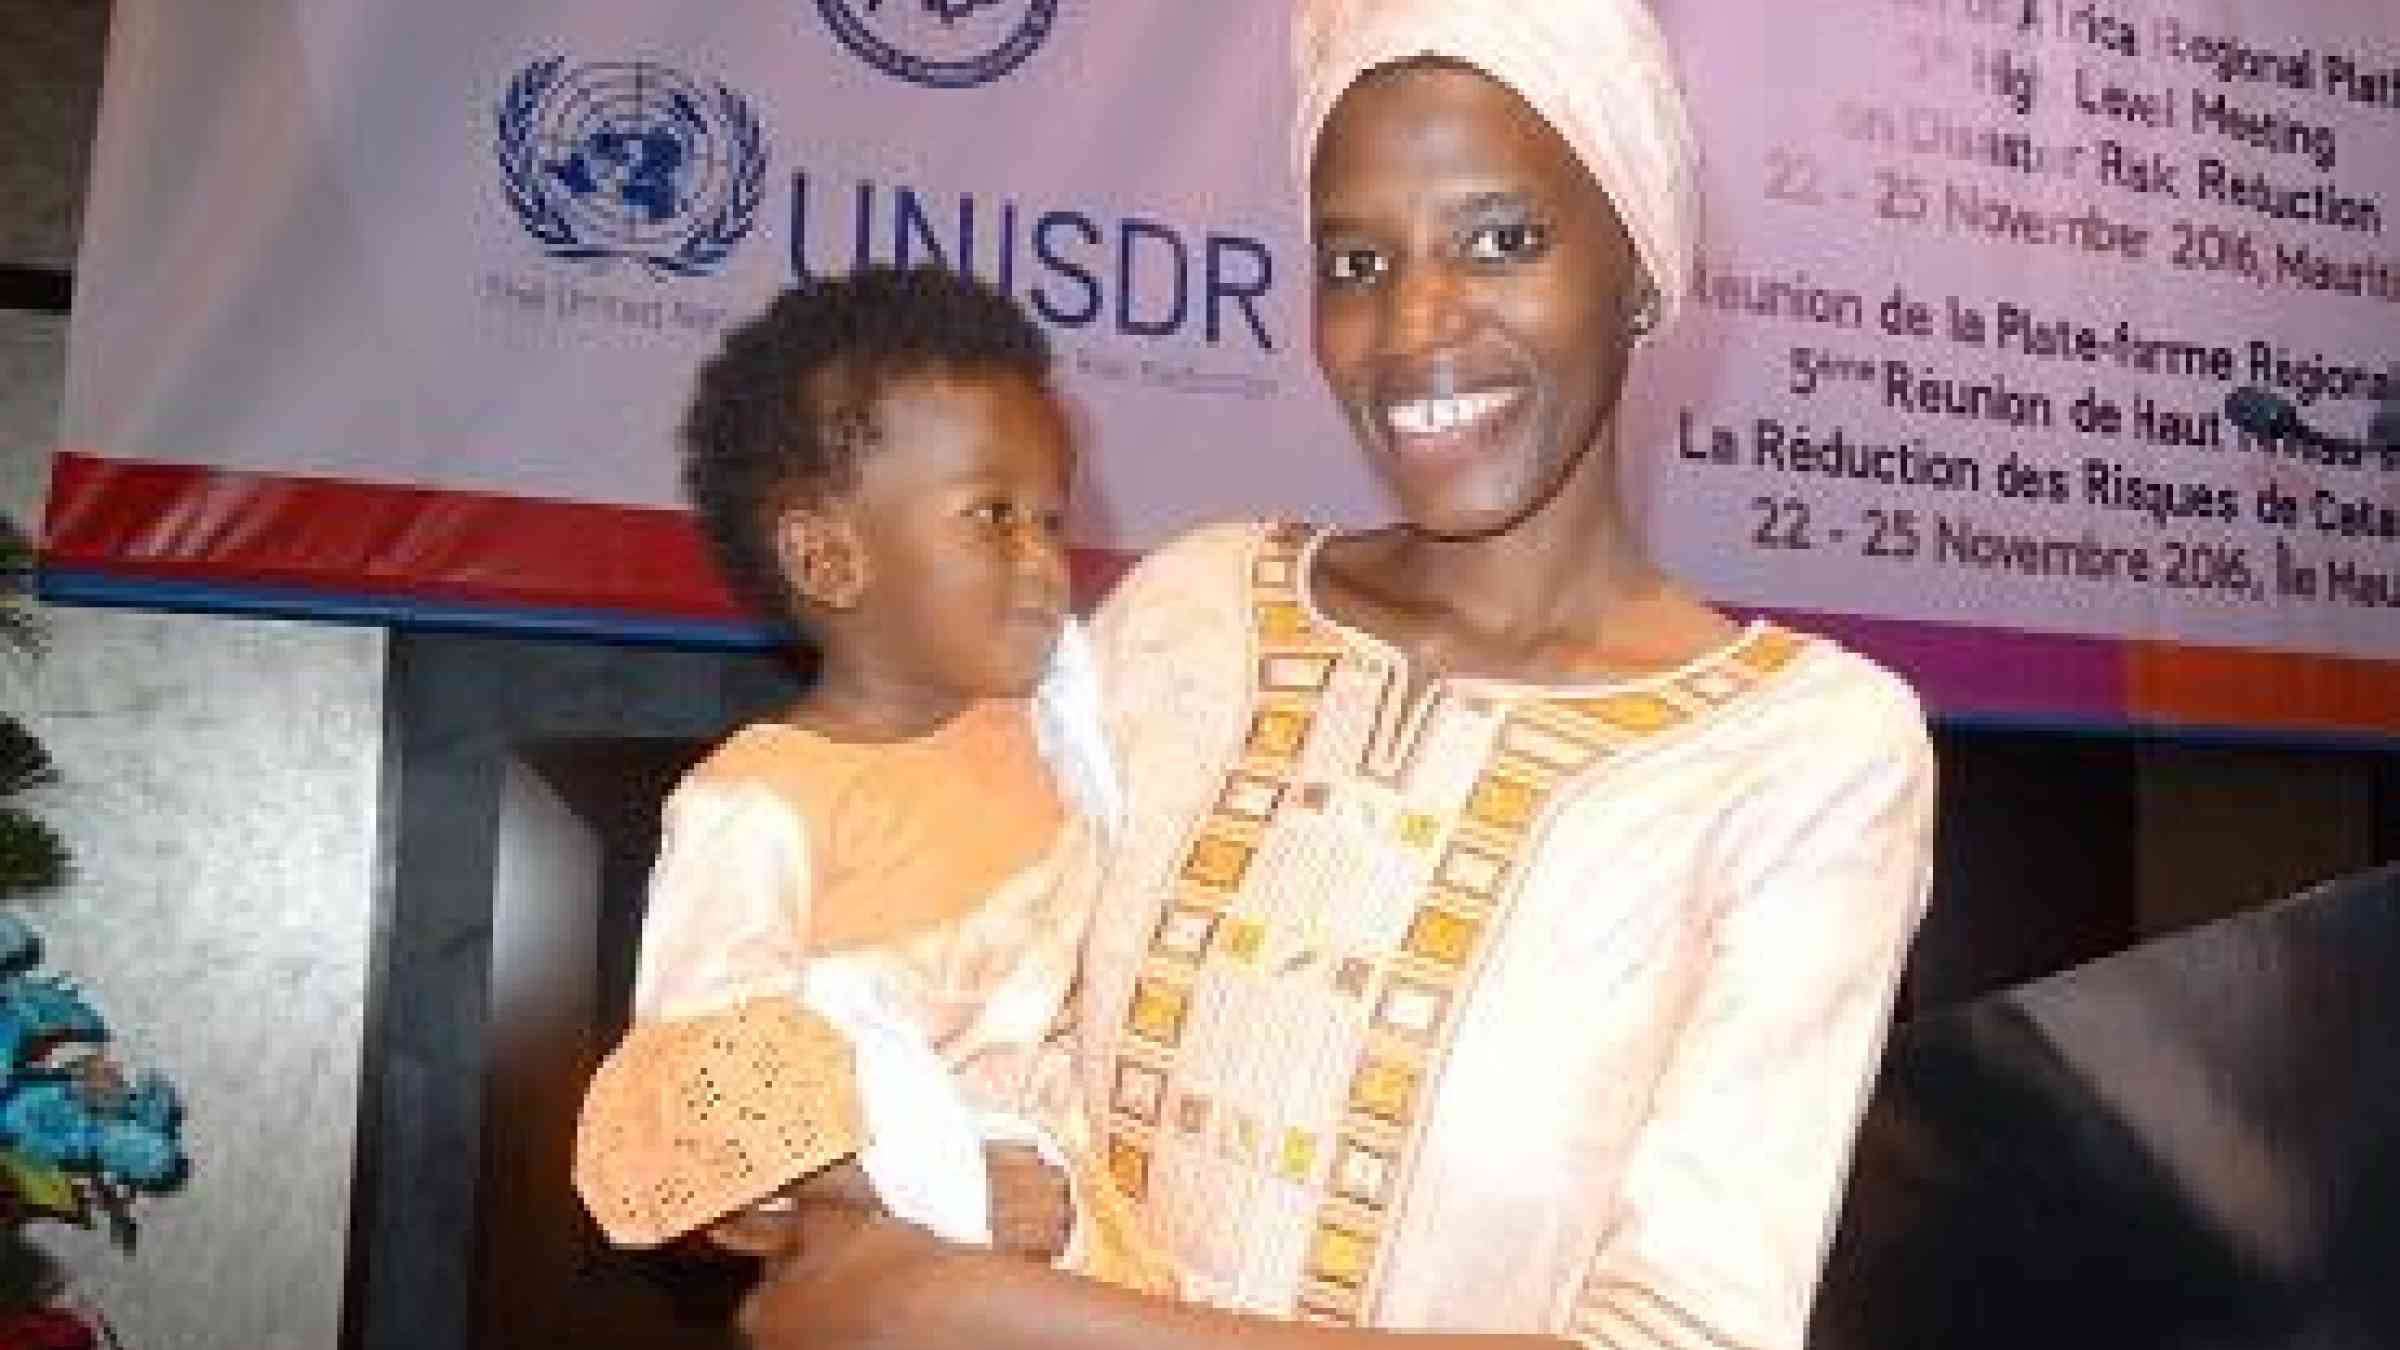 Faces of Resilience: Chilal and her mother, Ms. Oumie Sissokho, Director of Operations, Gambia National Disaster Management Agency, at the last Africa Regional Platform for Disaster Risk Reduction